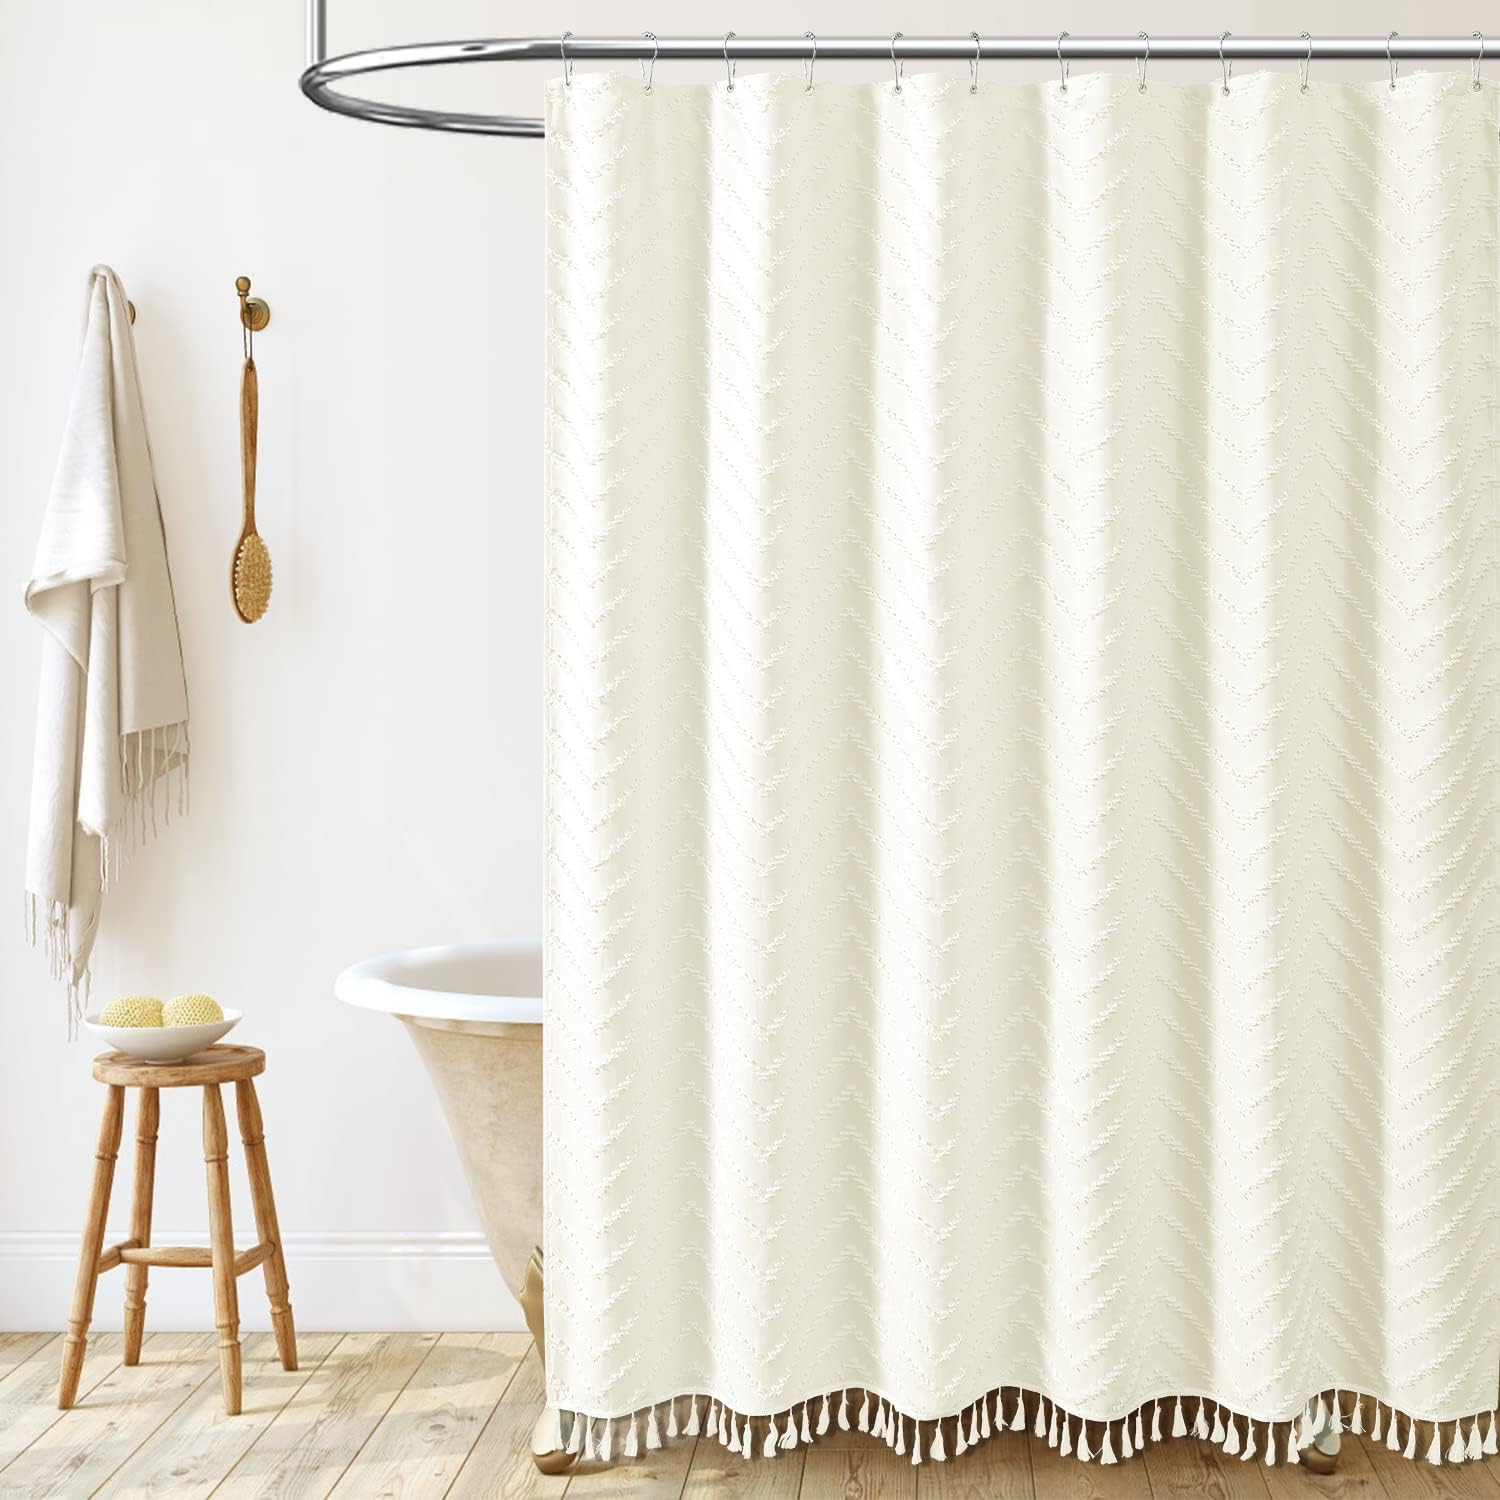 Dynamene Extra Long Shower Curtains 72×84 Review